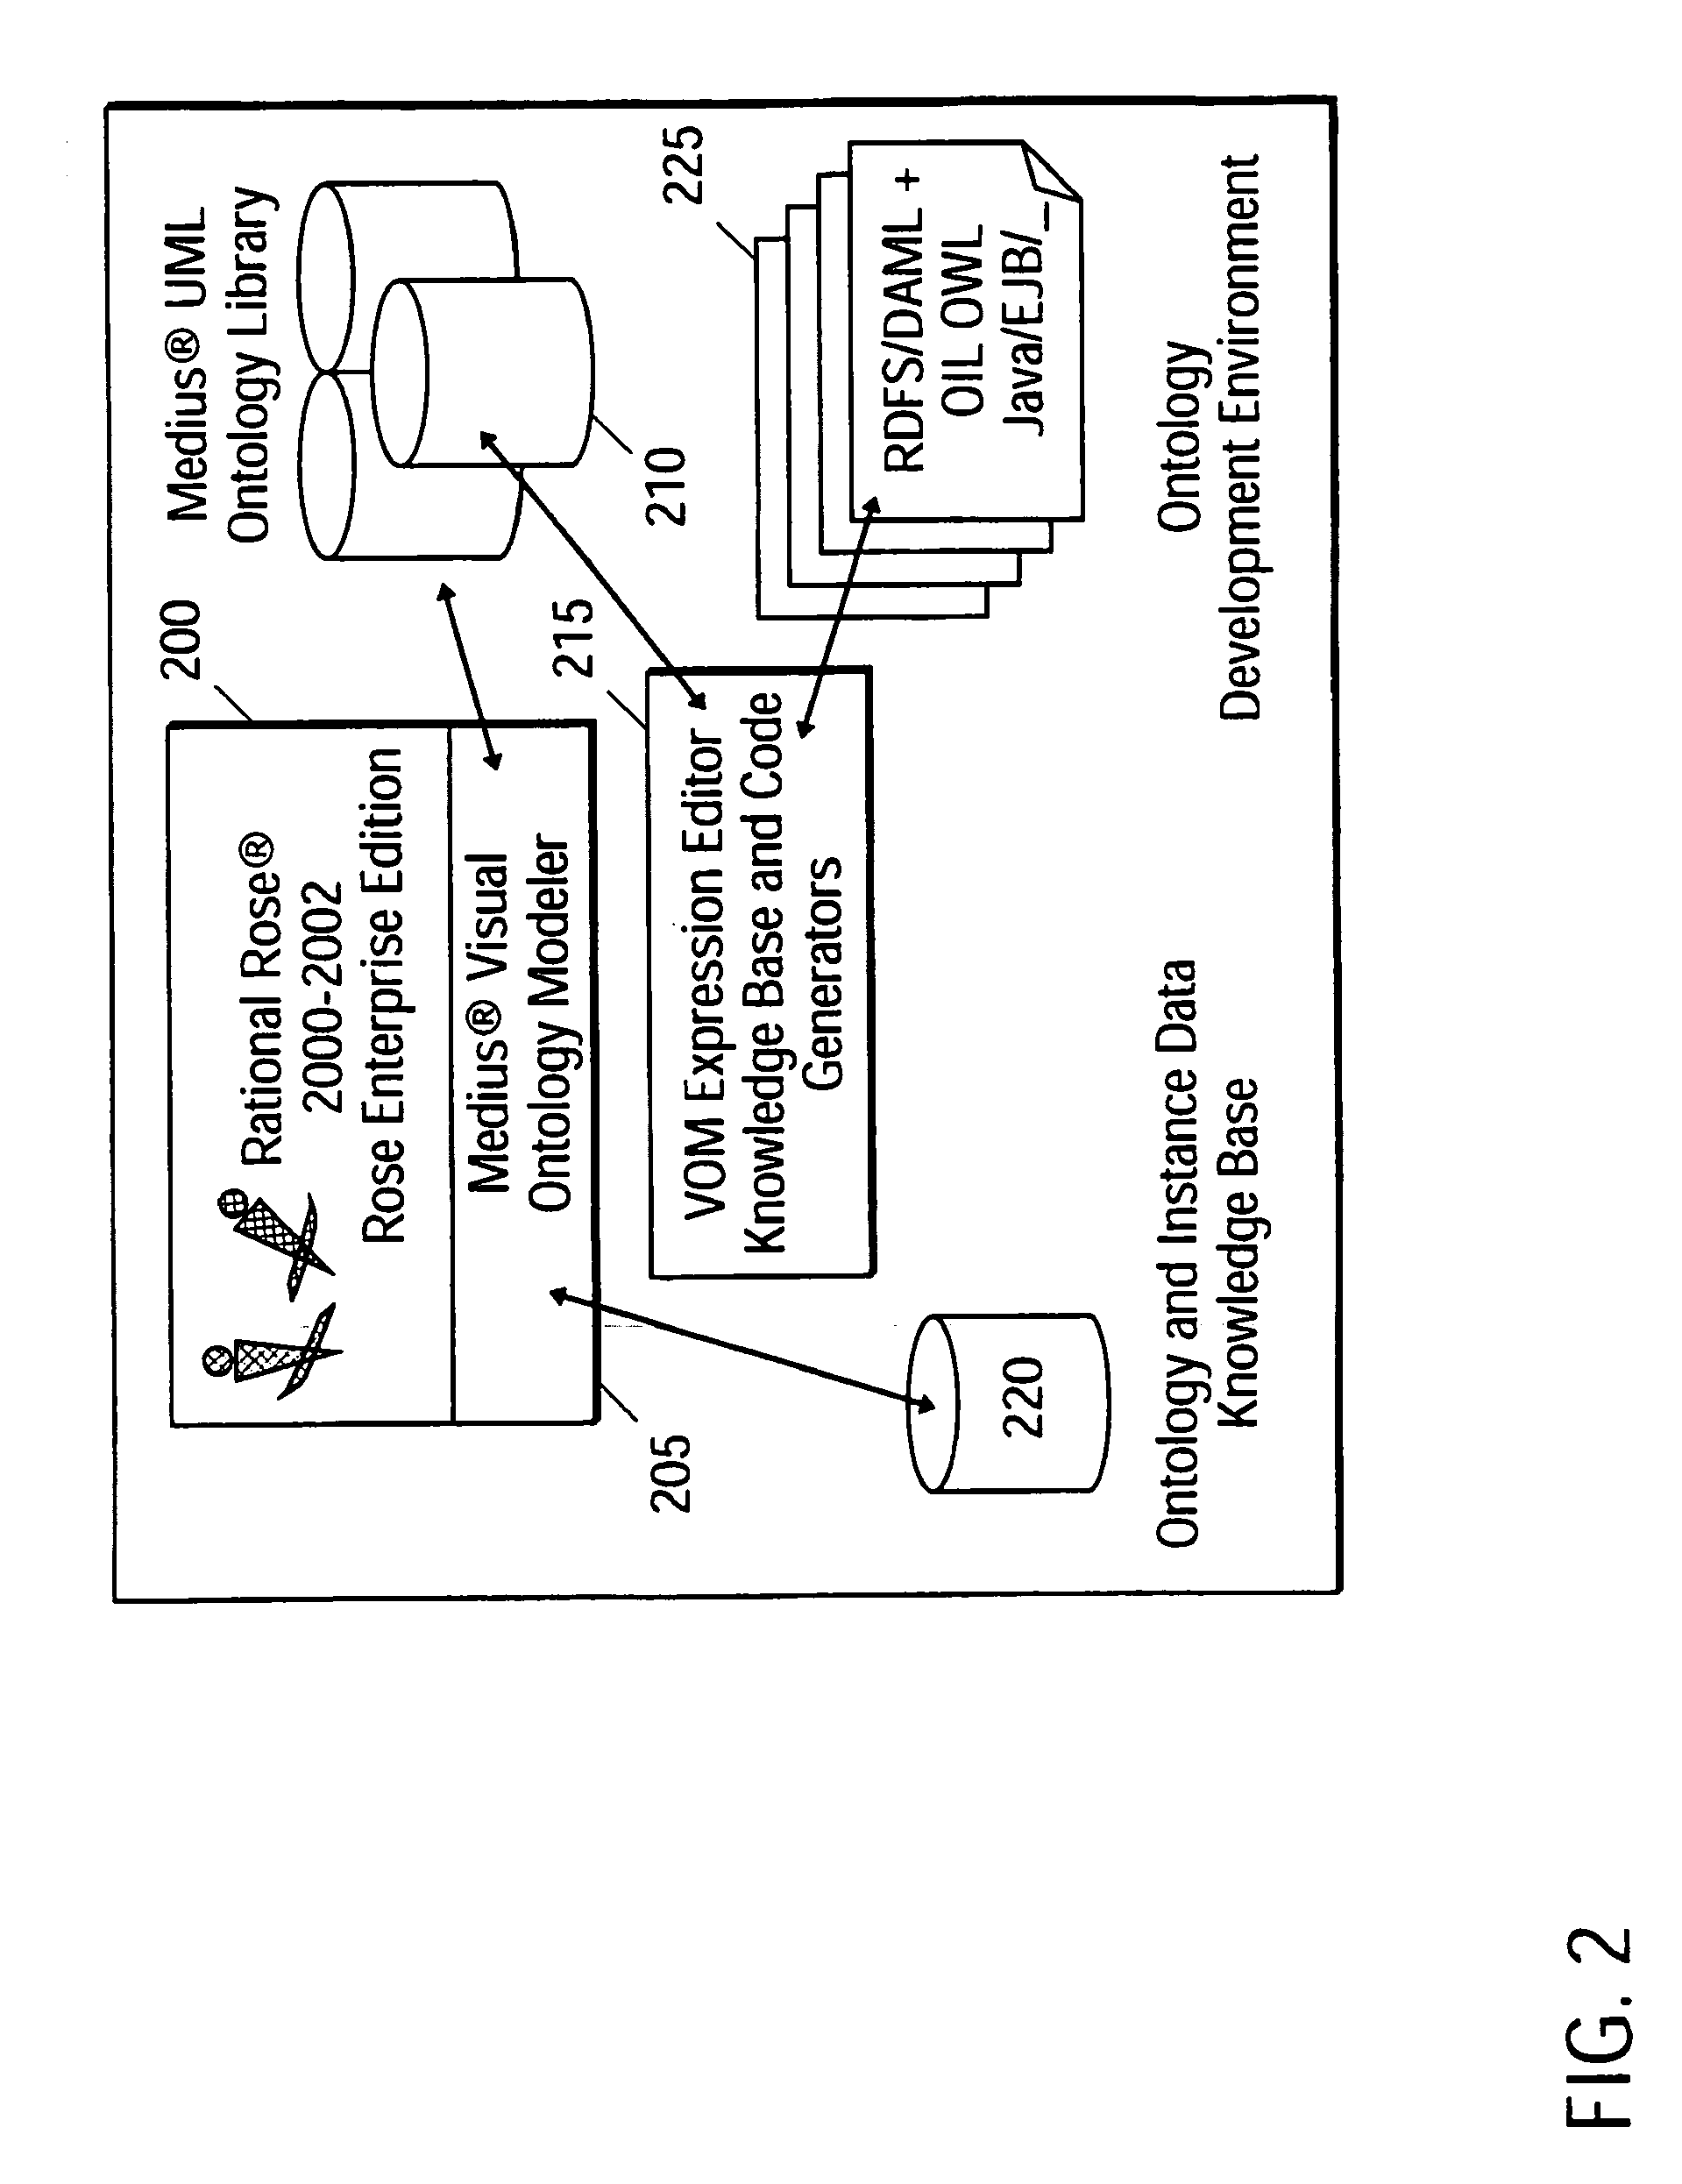 Method and apparatus for frame-based knowledge representation in the unified modeling language (UML)